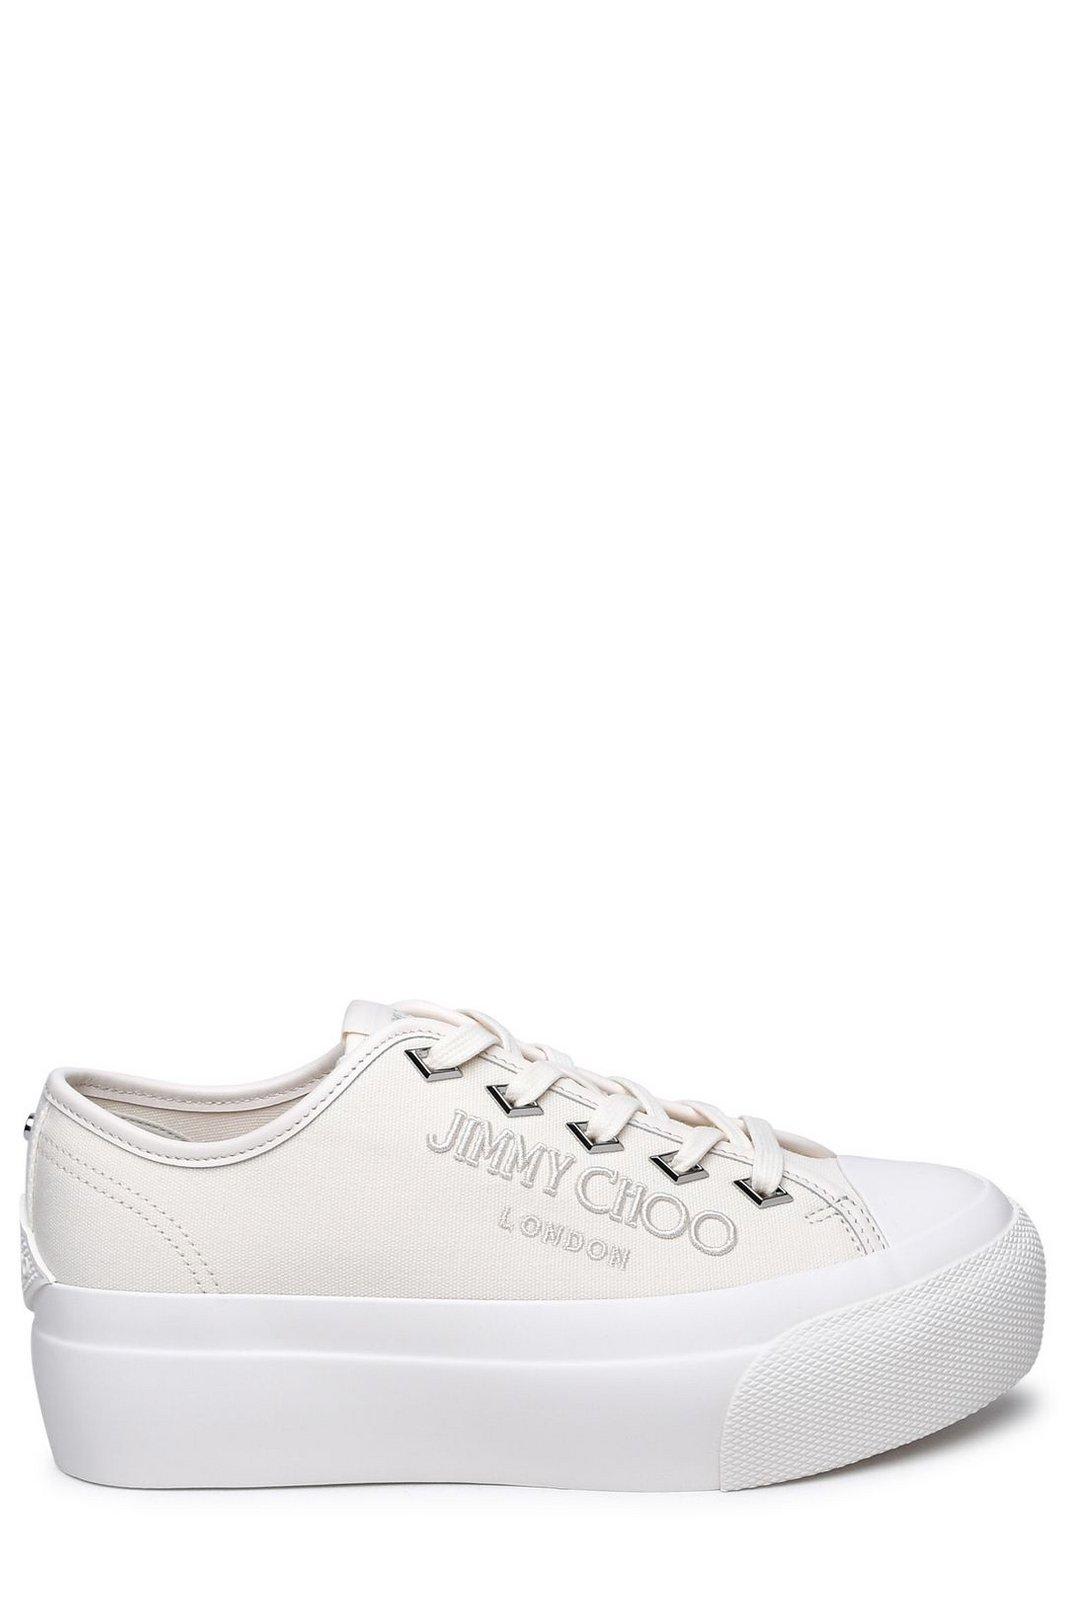 Jimmy Choo Logo Embroidered Platform Lace-up Sneakers